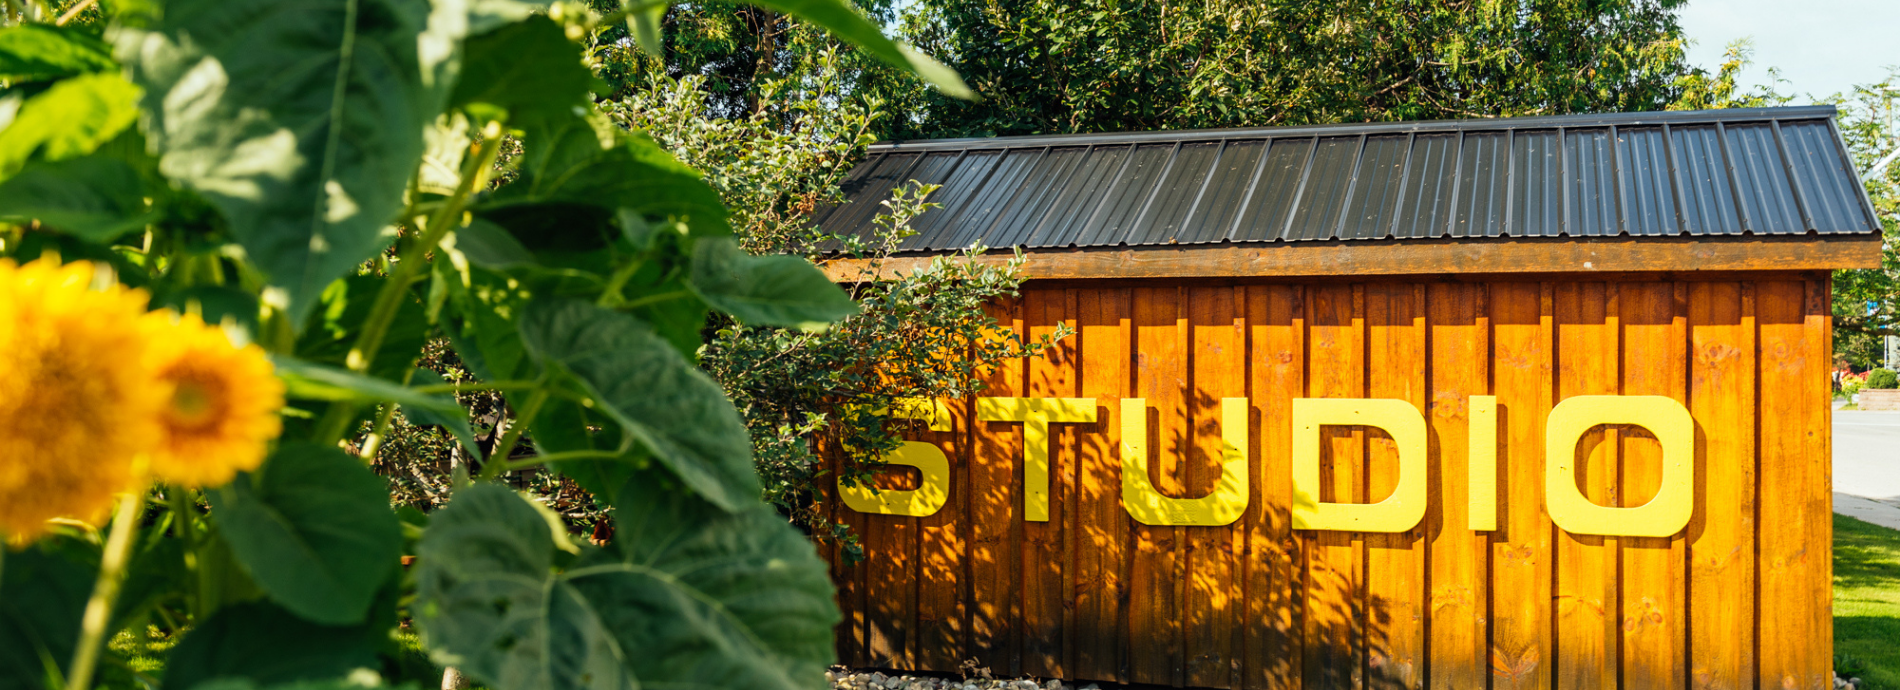 Coldwater art studio surrounded by sunflowers